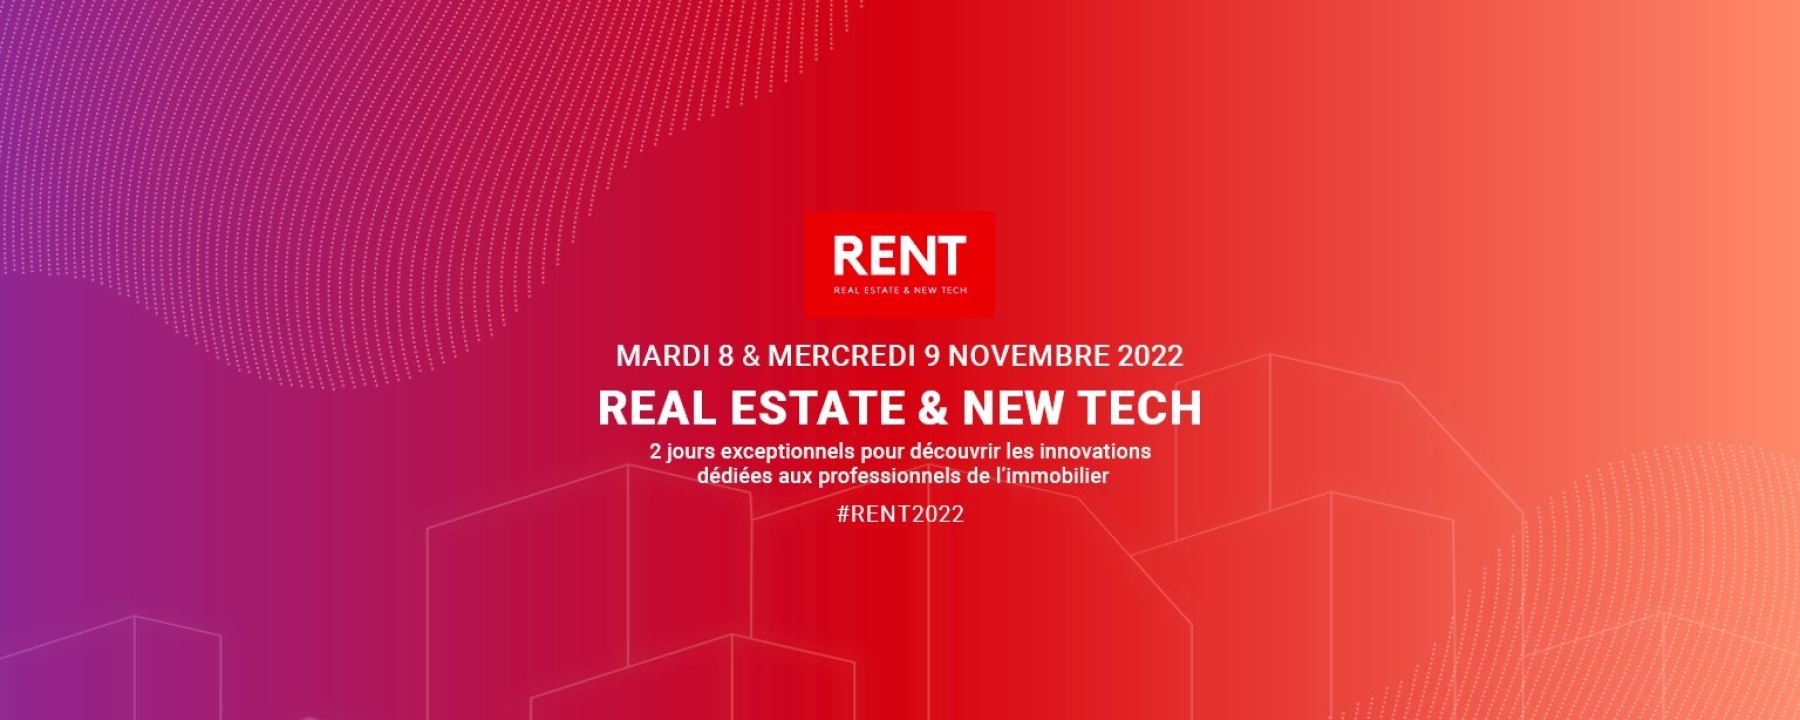 RENT-2022-immobilier-immo2